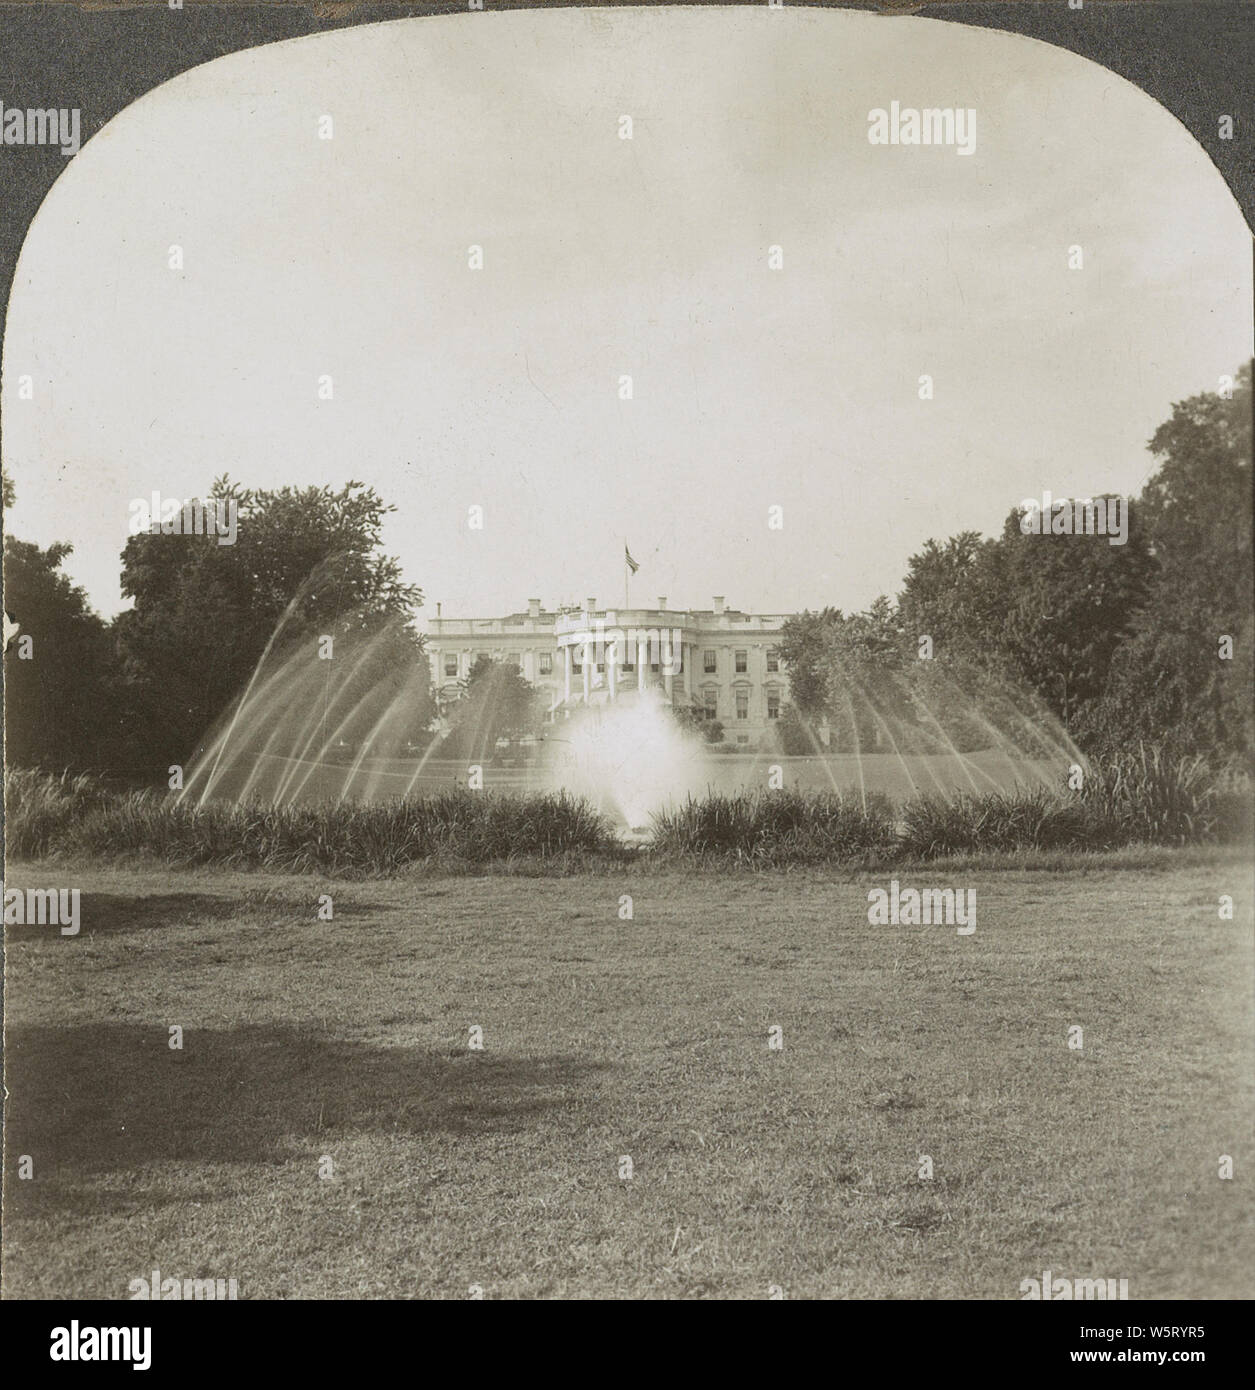 Looking North to the White House across the lawns of the Executive Grounds, Washington, D.C. 1928. Stock Photo